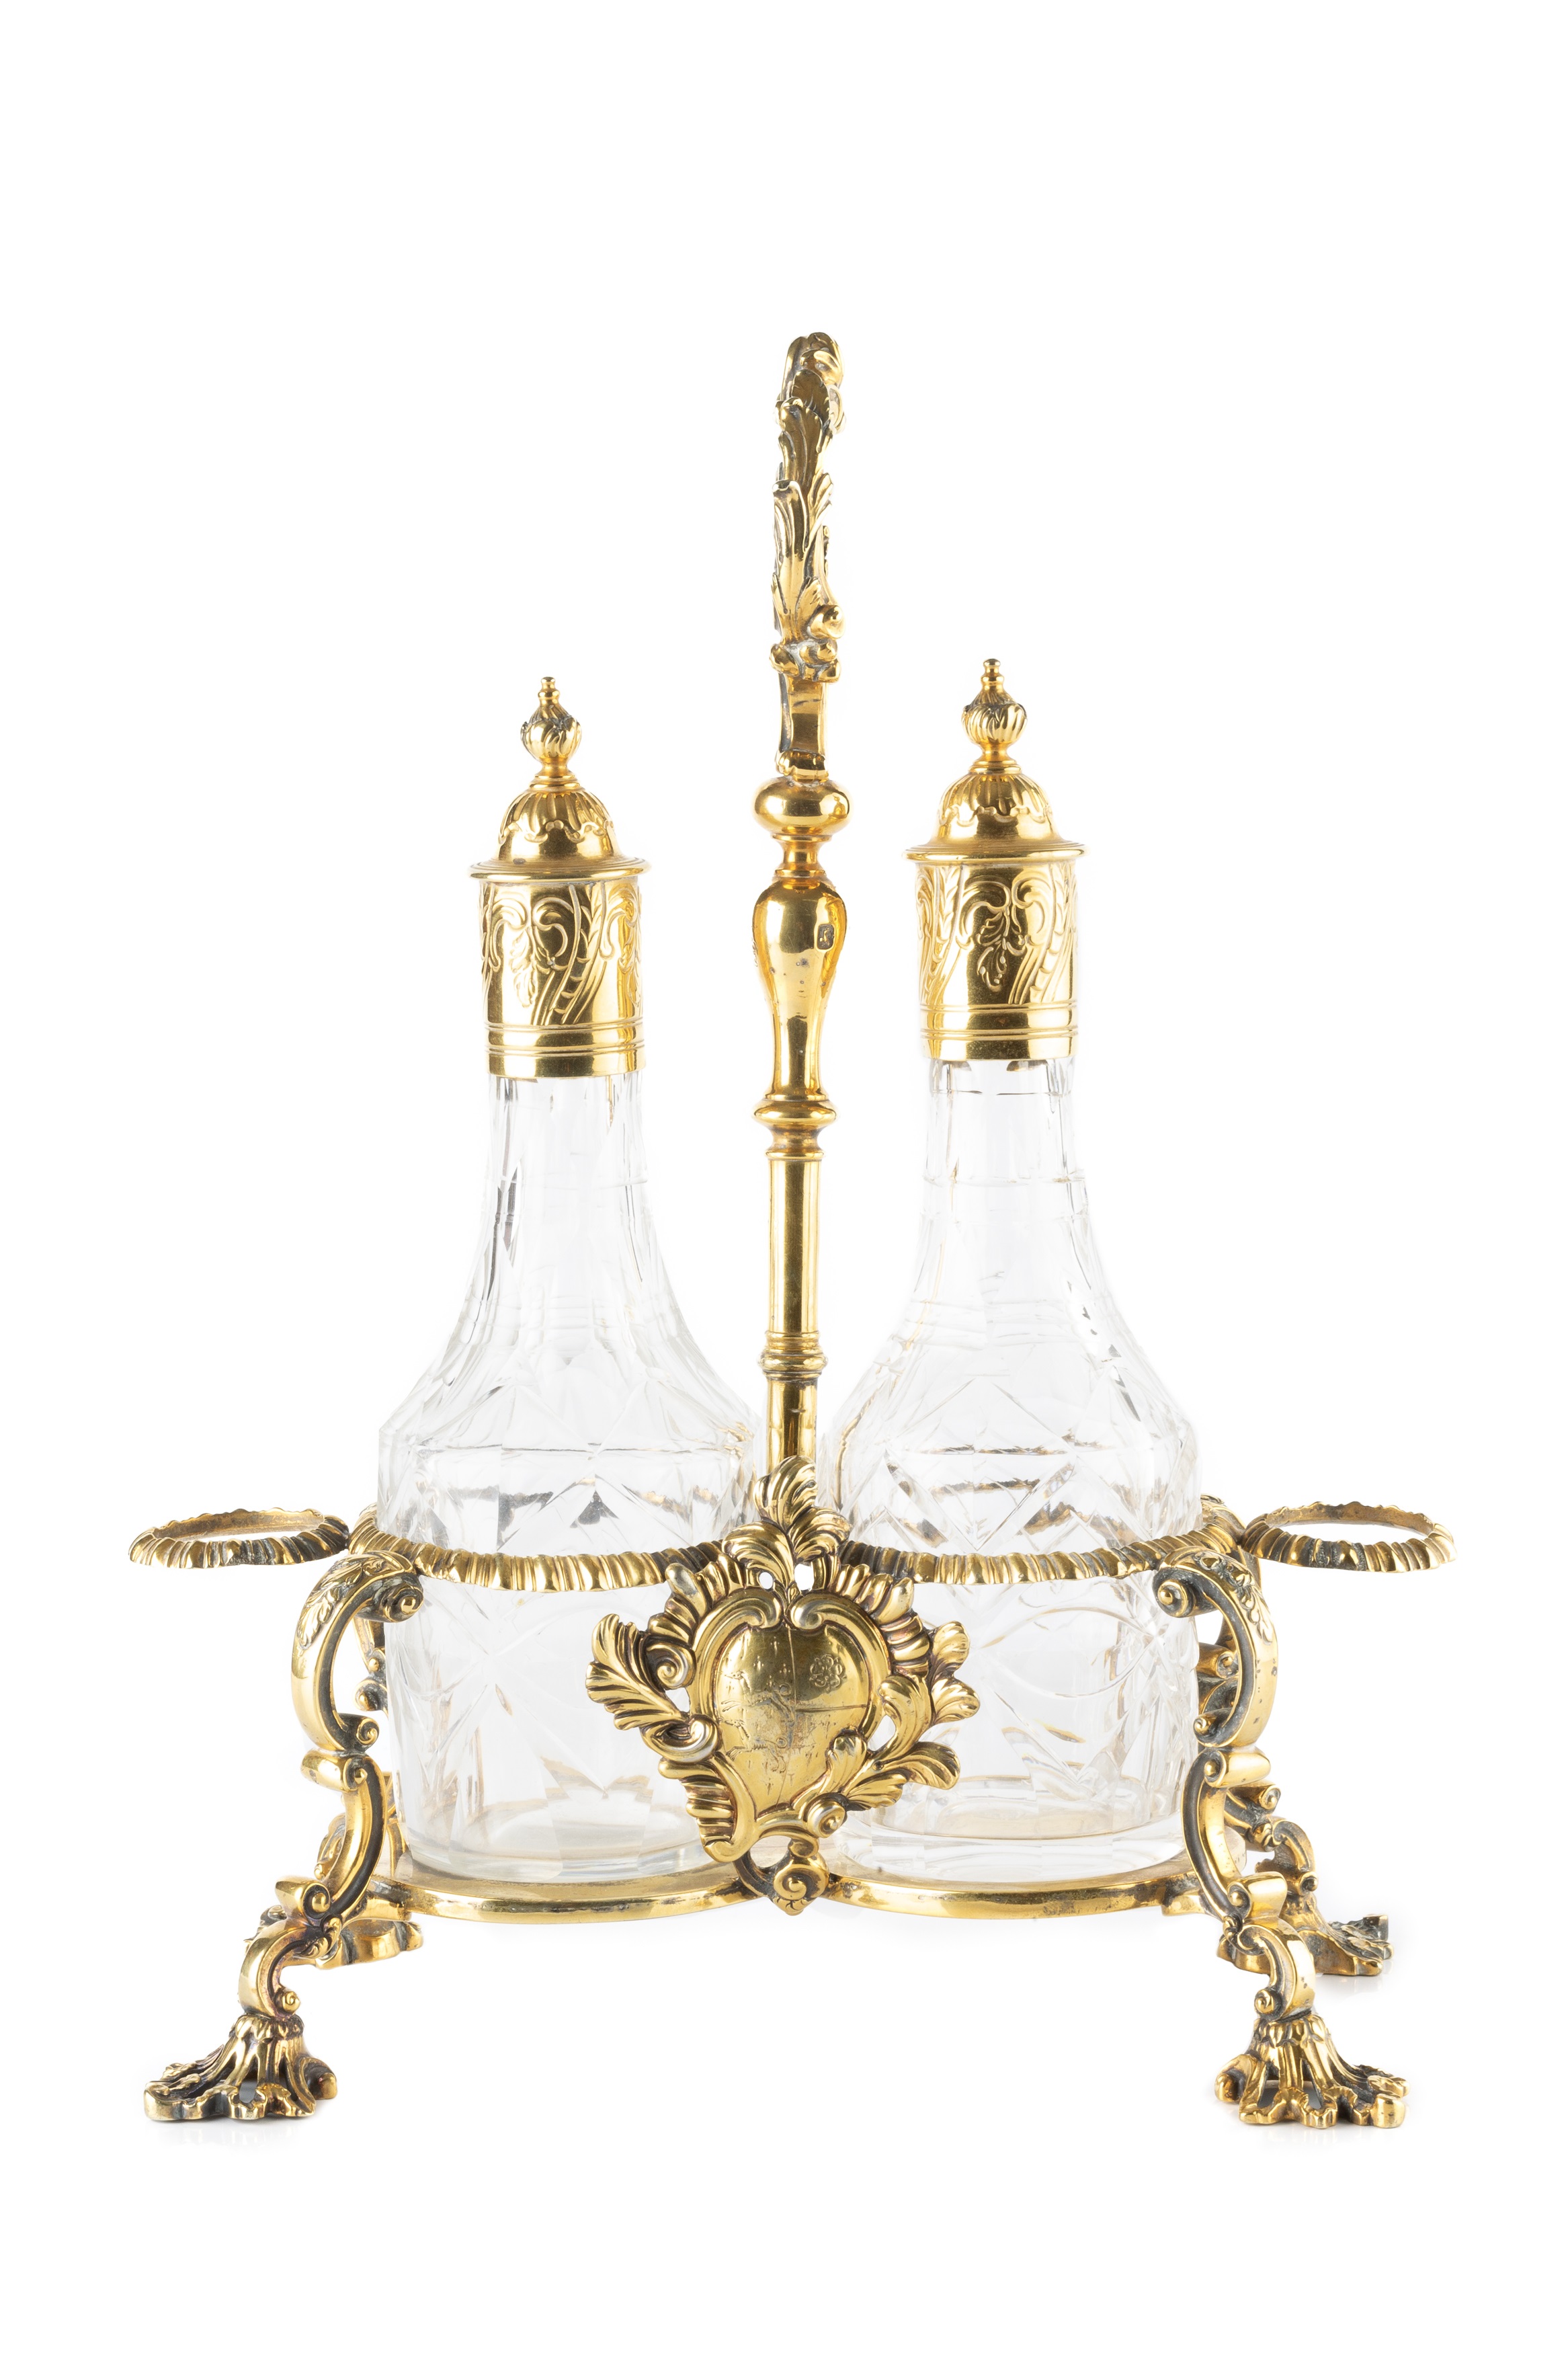 A George III silver-gilt cruet stand, the central foliate loop handle flanked by two gadrooned